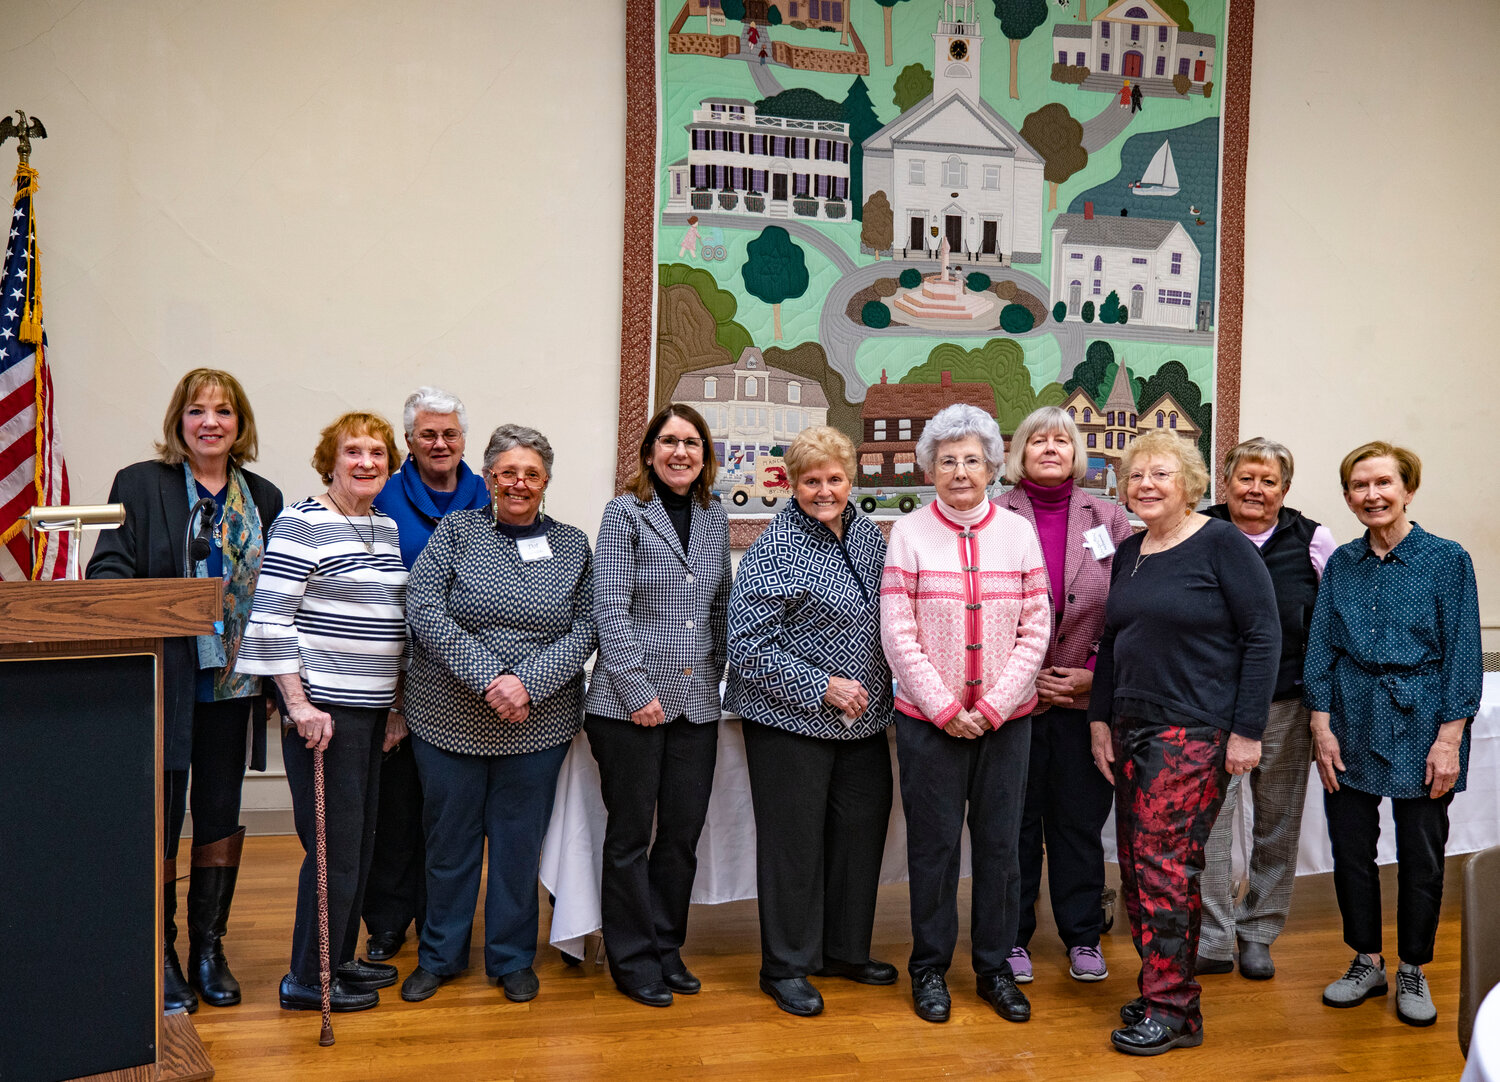 Manchester Women’s Club’s Chris Gauthier-Kelley poses with Joan Kelley, the VNACare’s Katherine Keith, Manchester Women’s Club President Dot Sieradzki, Karen Webber, Bev Melvin, Fay Noonan, Jackie McDiarmid, Peggy McDermott, Mary Ellen Foster and Anne Gilson. 